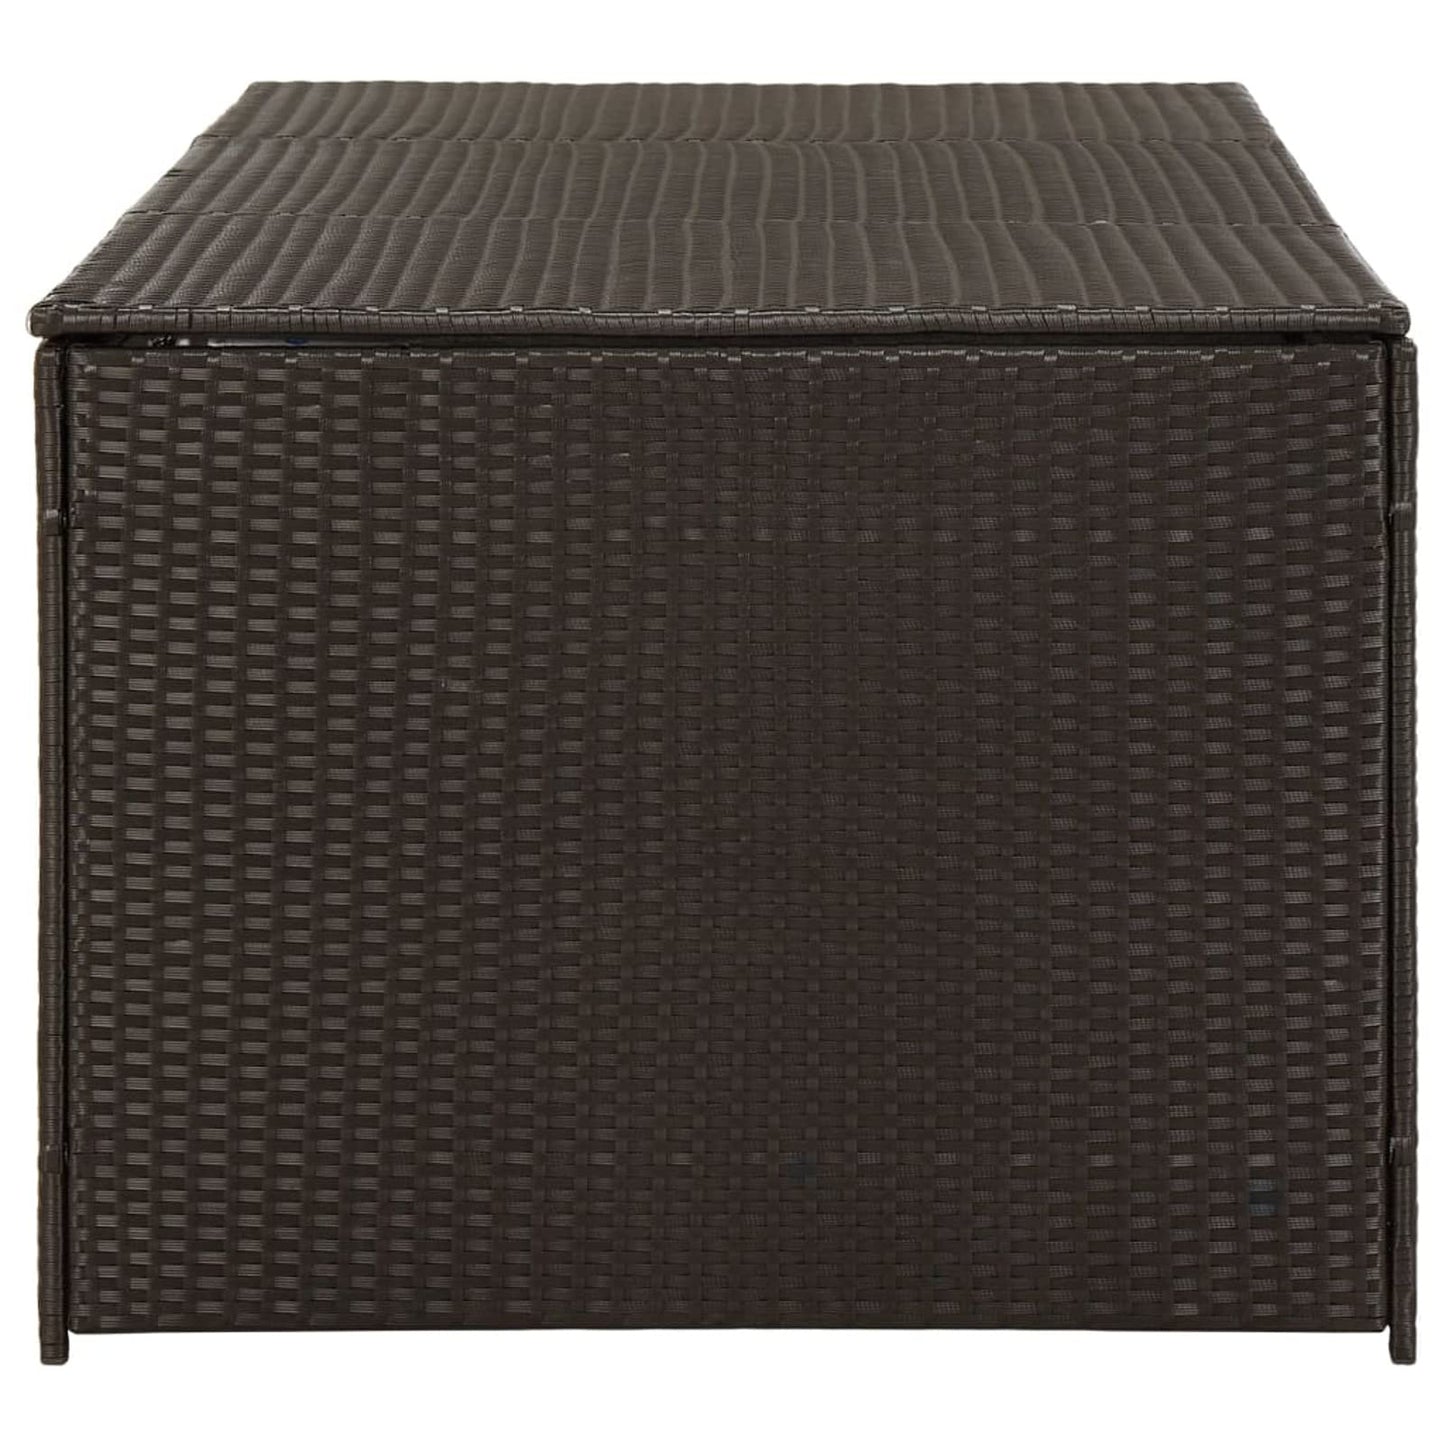 Festnight Patio Storage Box Deck Box for Patio Furniture, Outdoor Cushions, Garden Tools and Pool Toys Poly Rattan 70.8"x35.4"x29.5" Brown